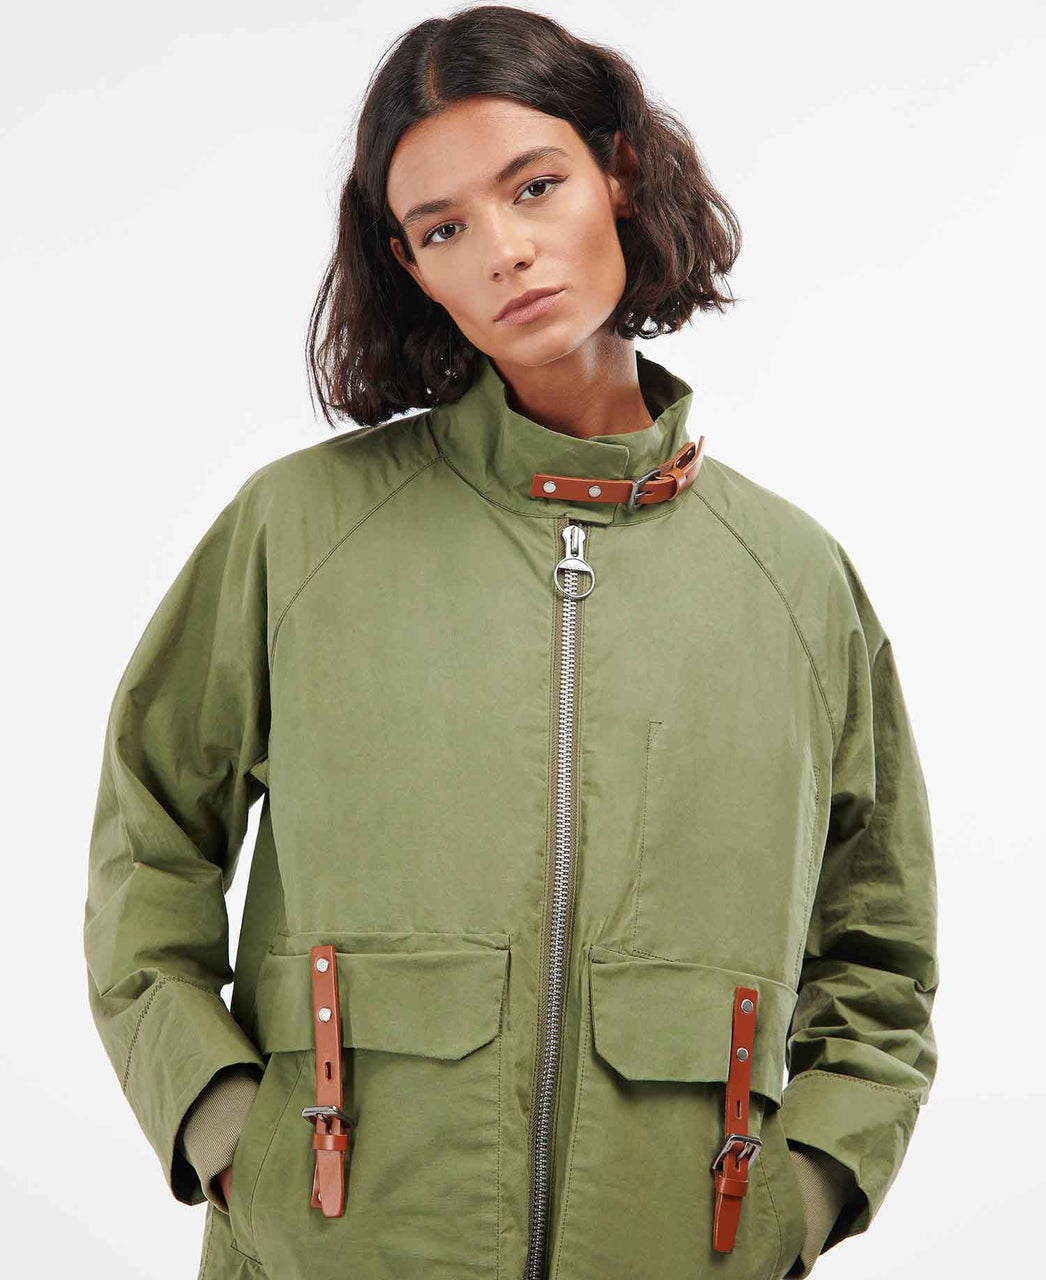 Ally Capellino x Barbour Lassie Waxed Cotton Jacket in Army Green